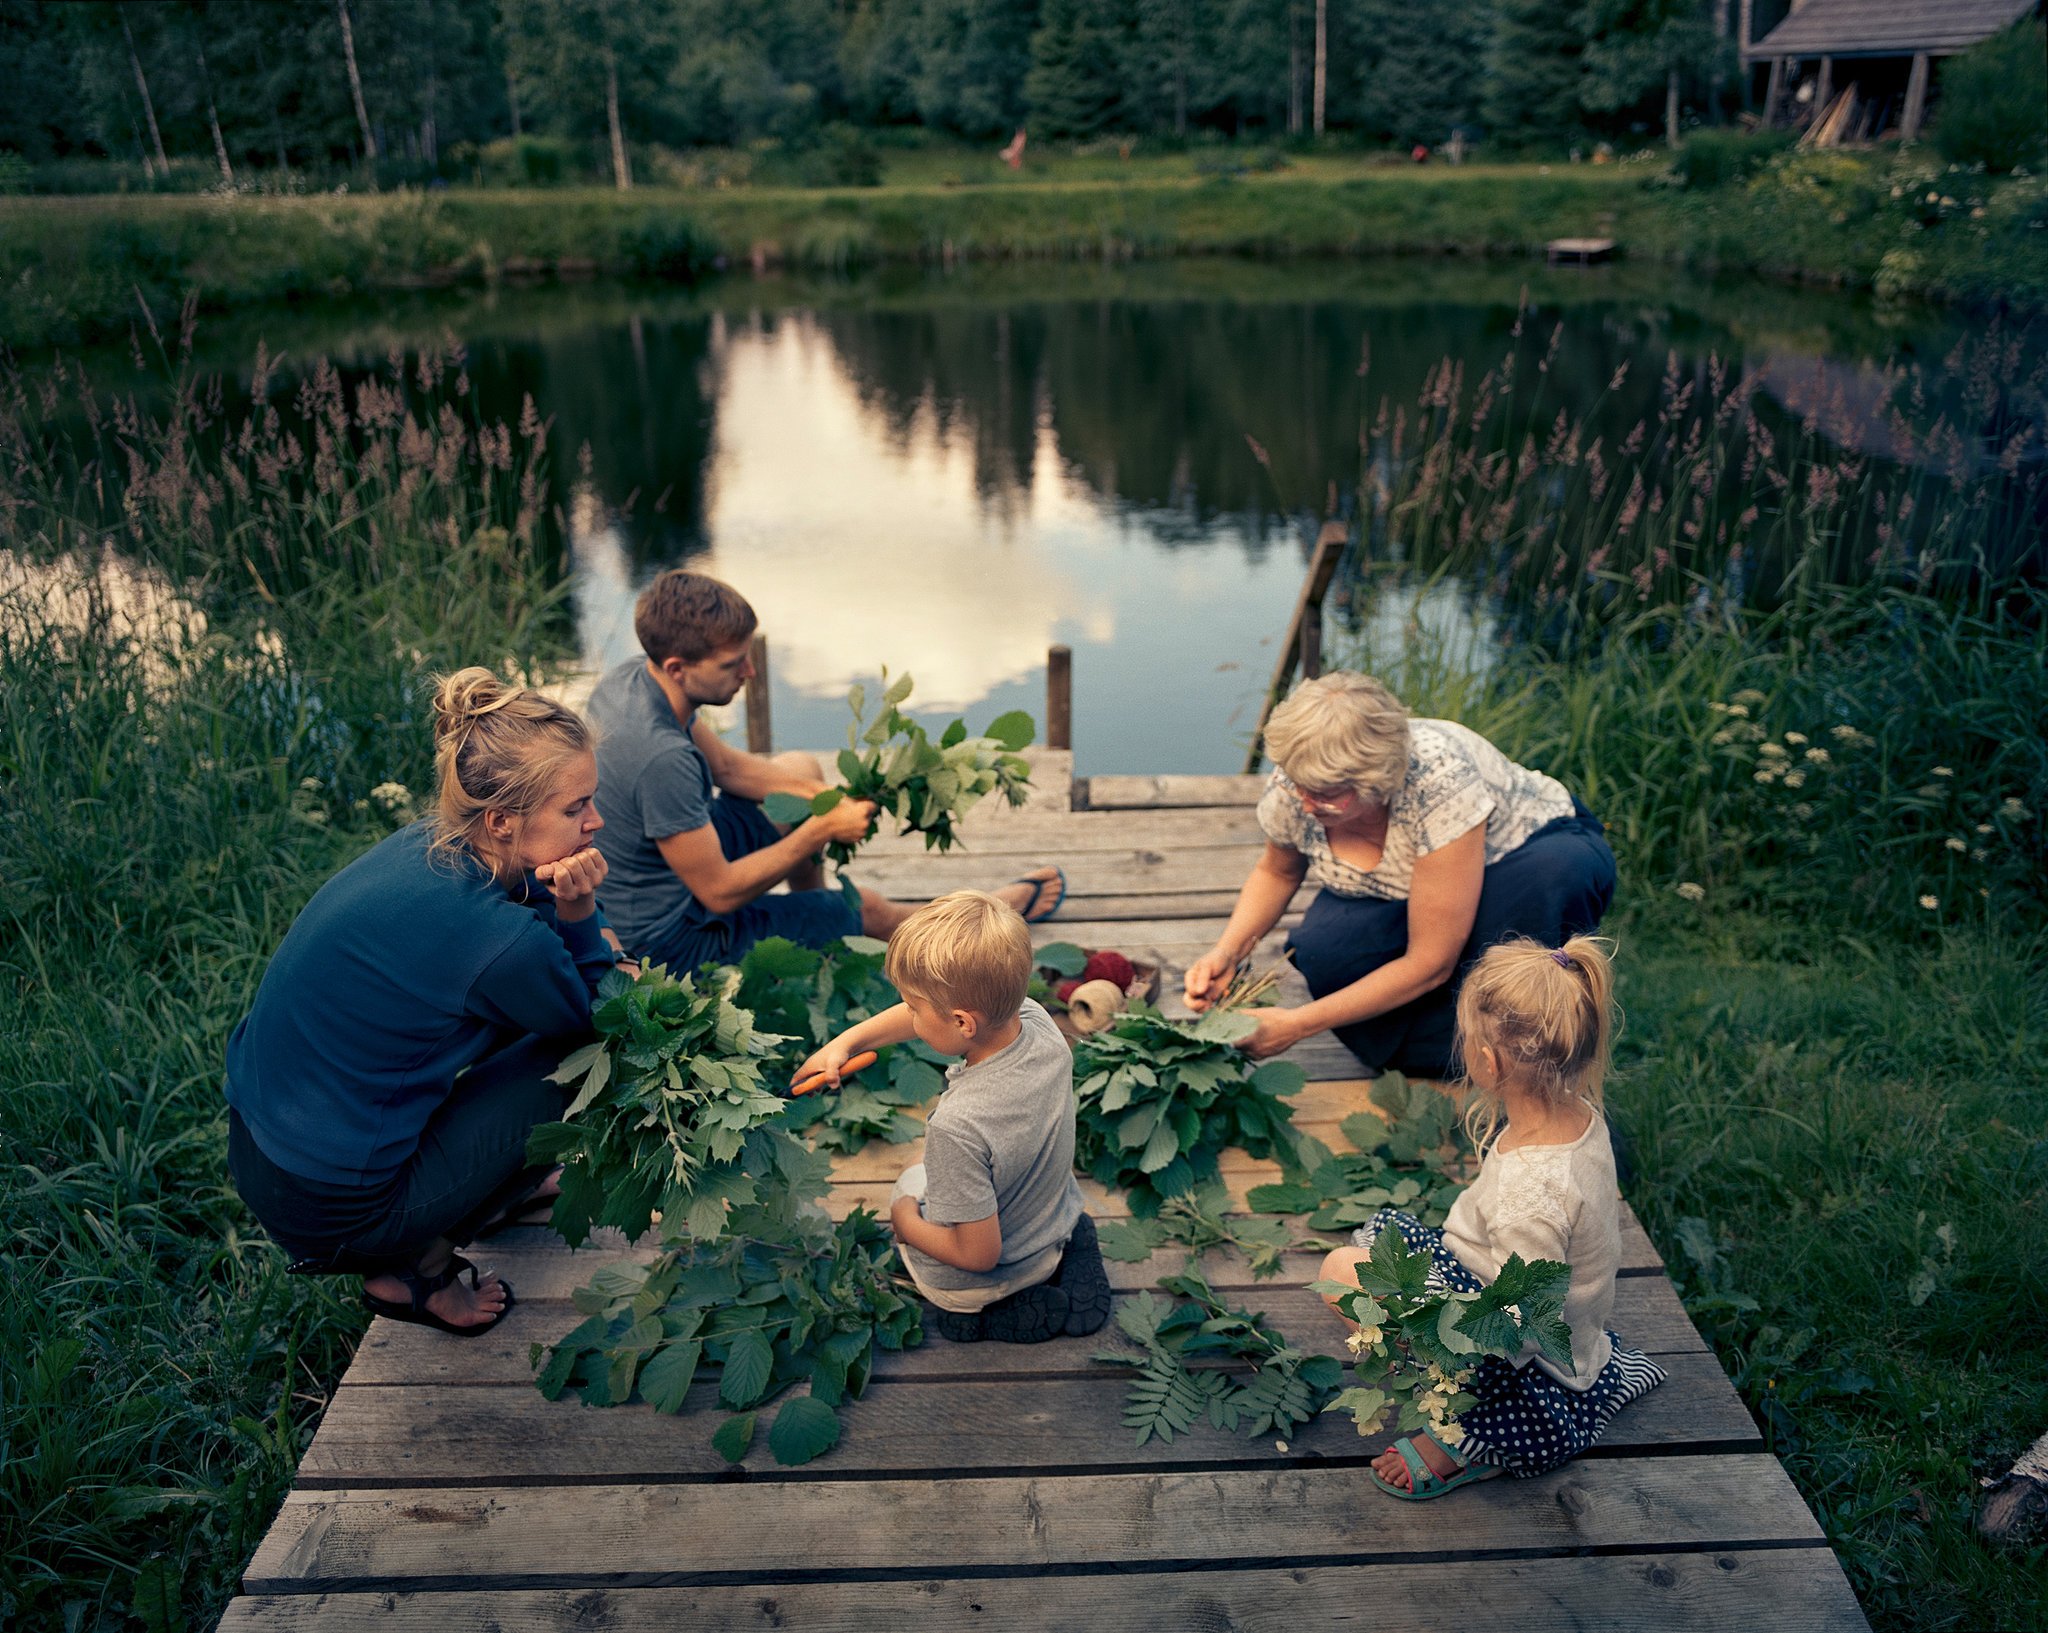 At the Mooska sauna, from left: Mariann and Henry Liimal, their son, Kaius, the proprietor Eda Veeroja and their daughter, Lovise.